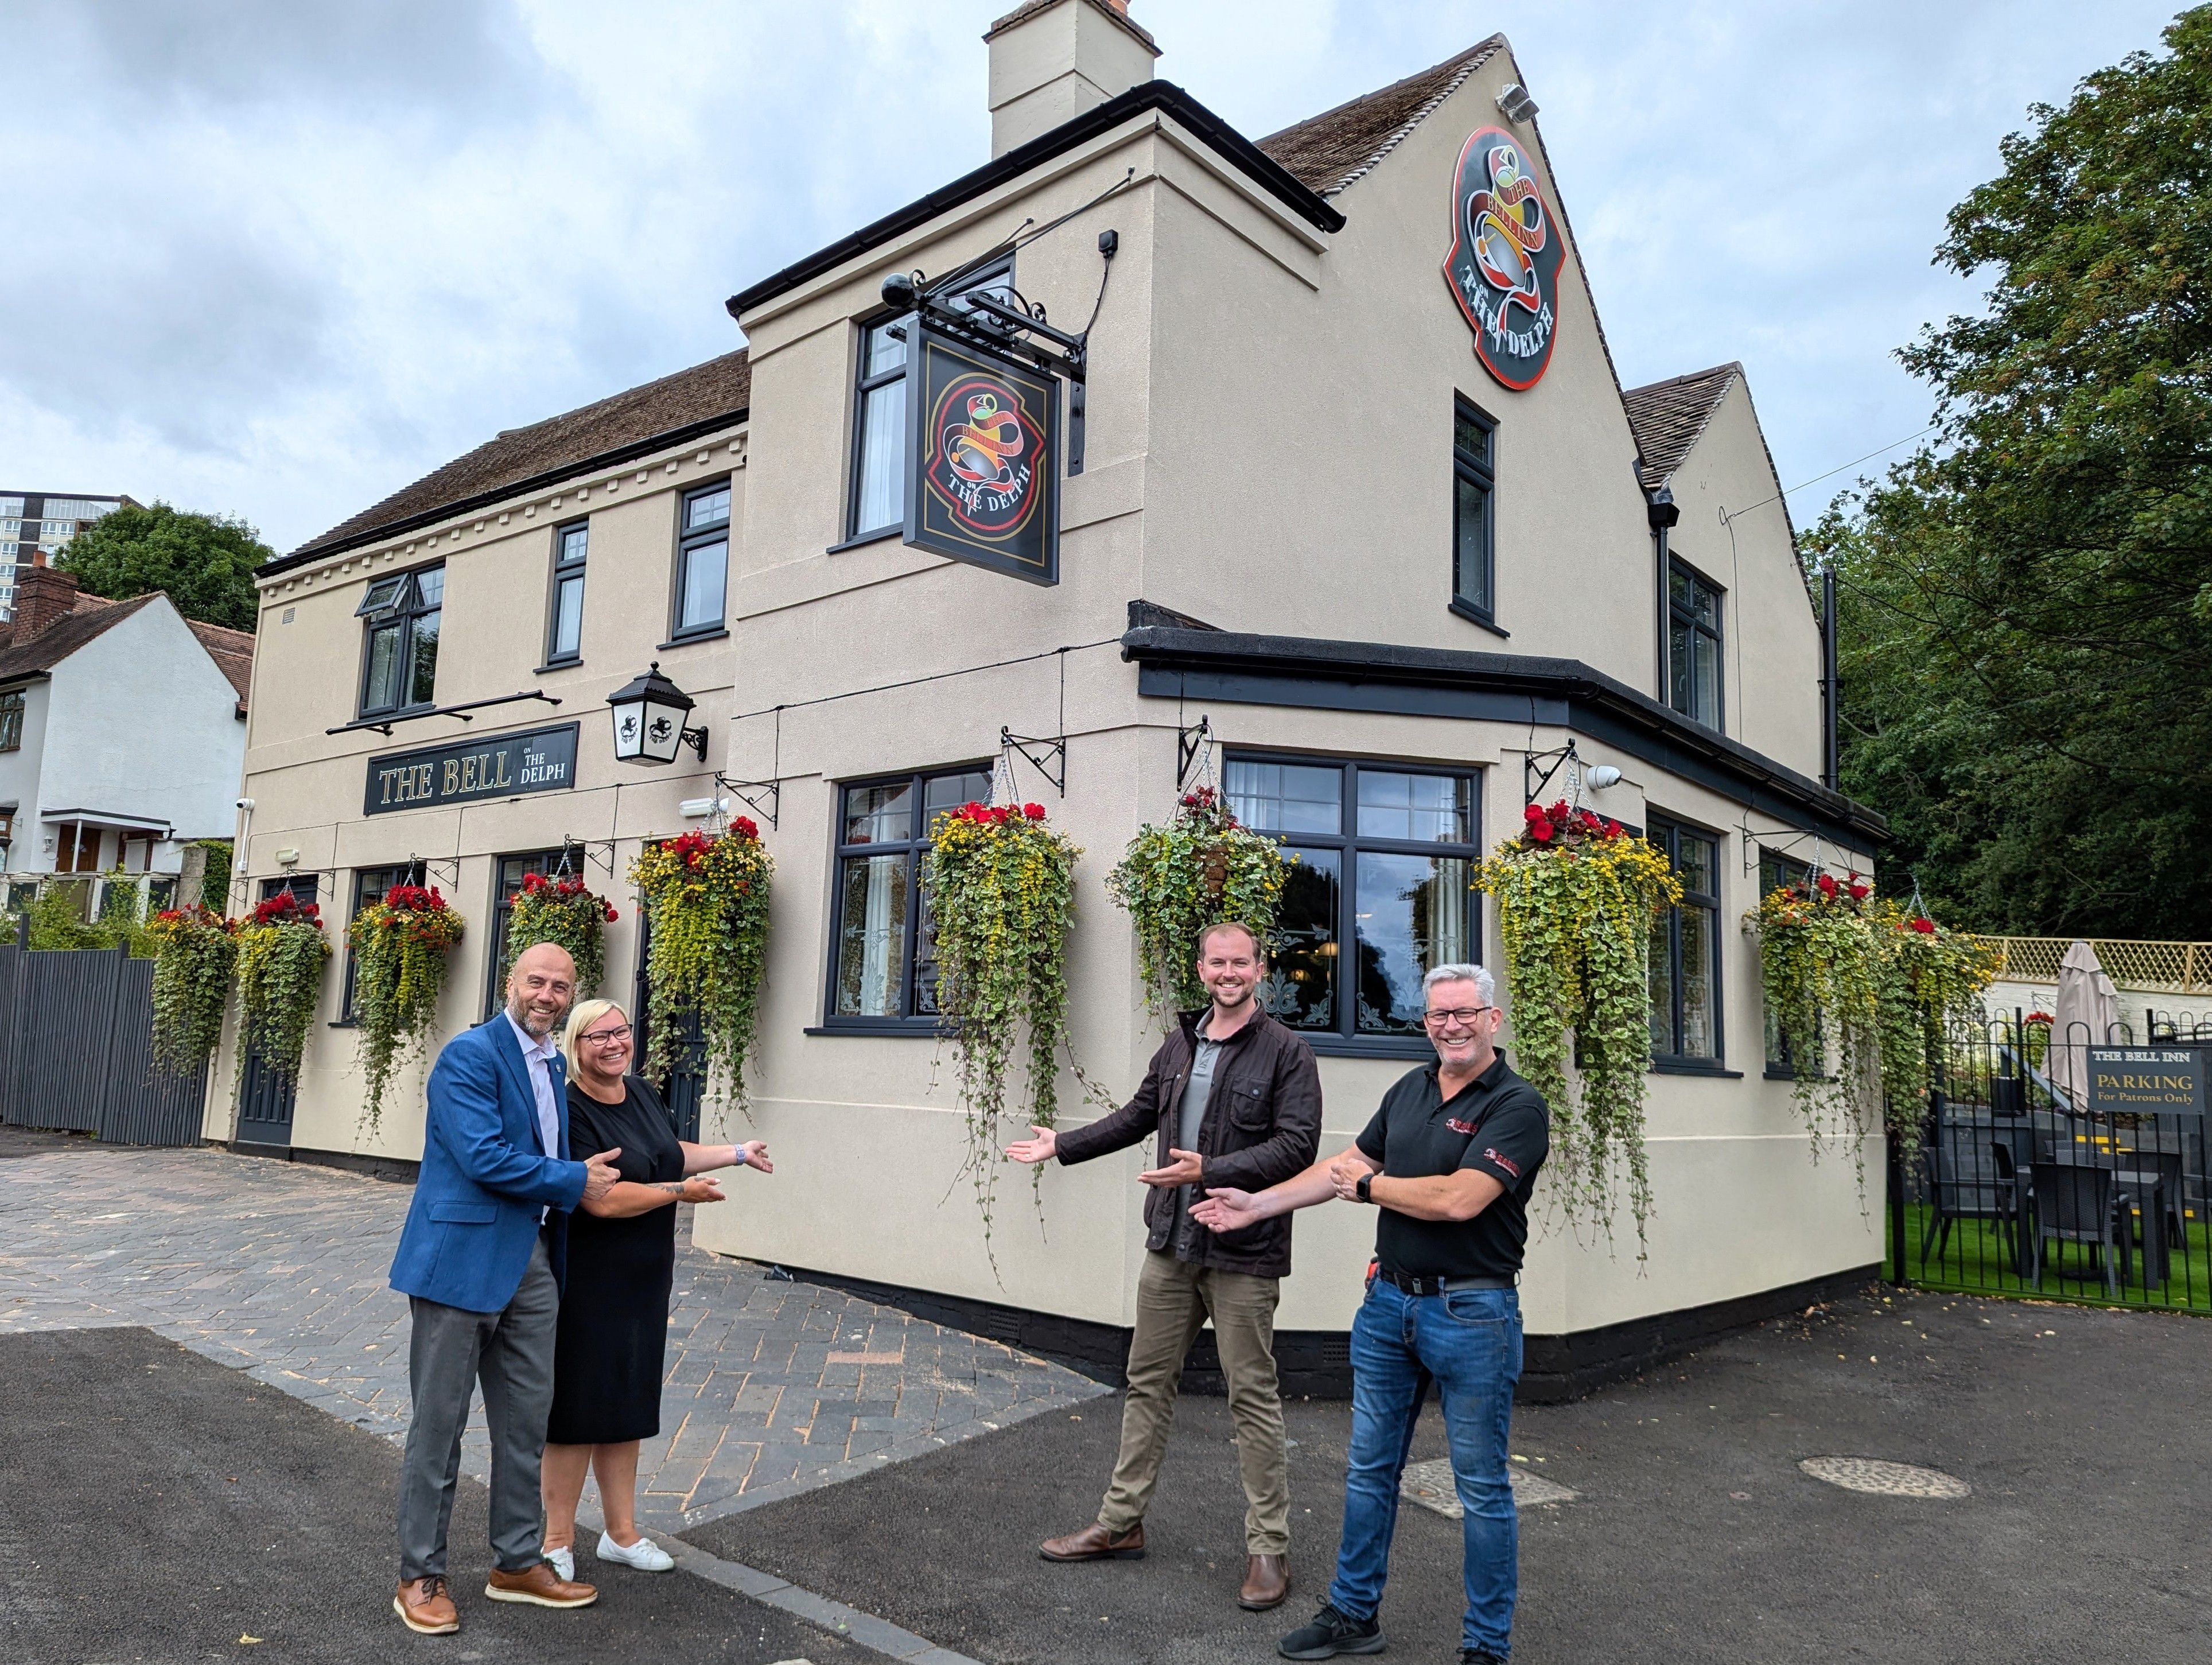 Traditional Brierley Hill pub which has been closed for years to reopen today after being 'brought back to life' with impressive refit